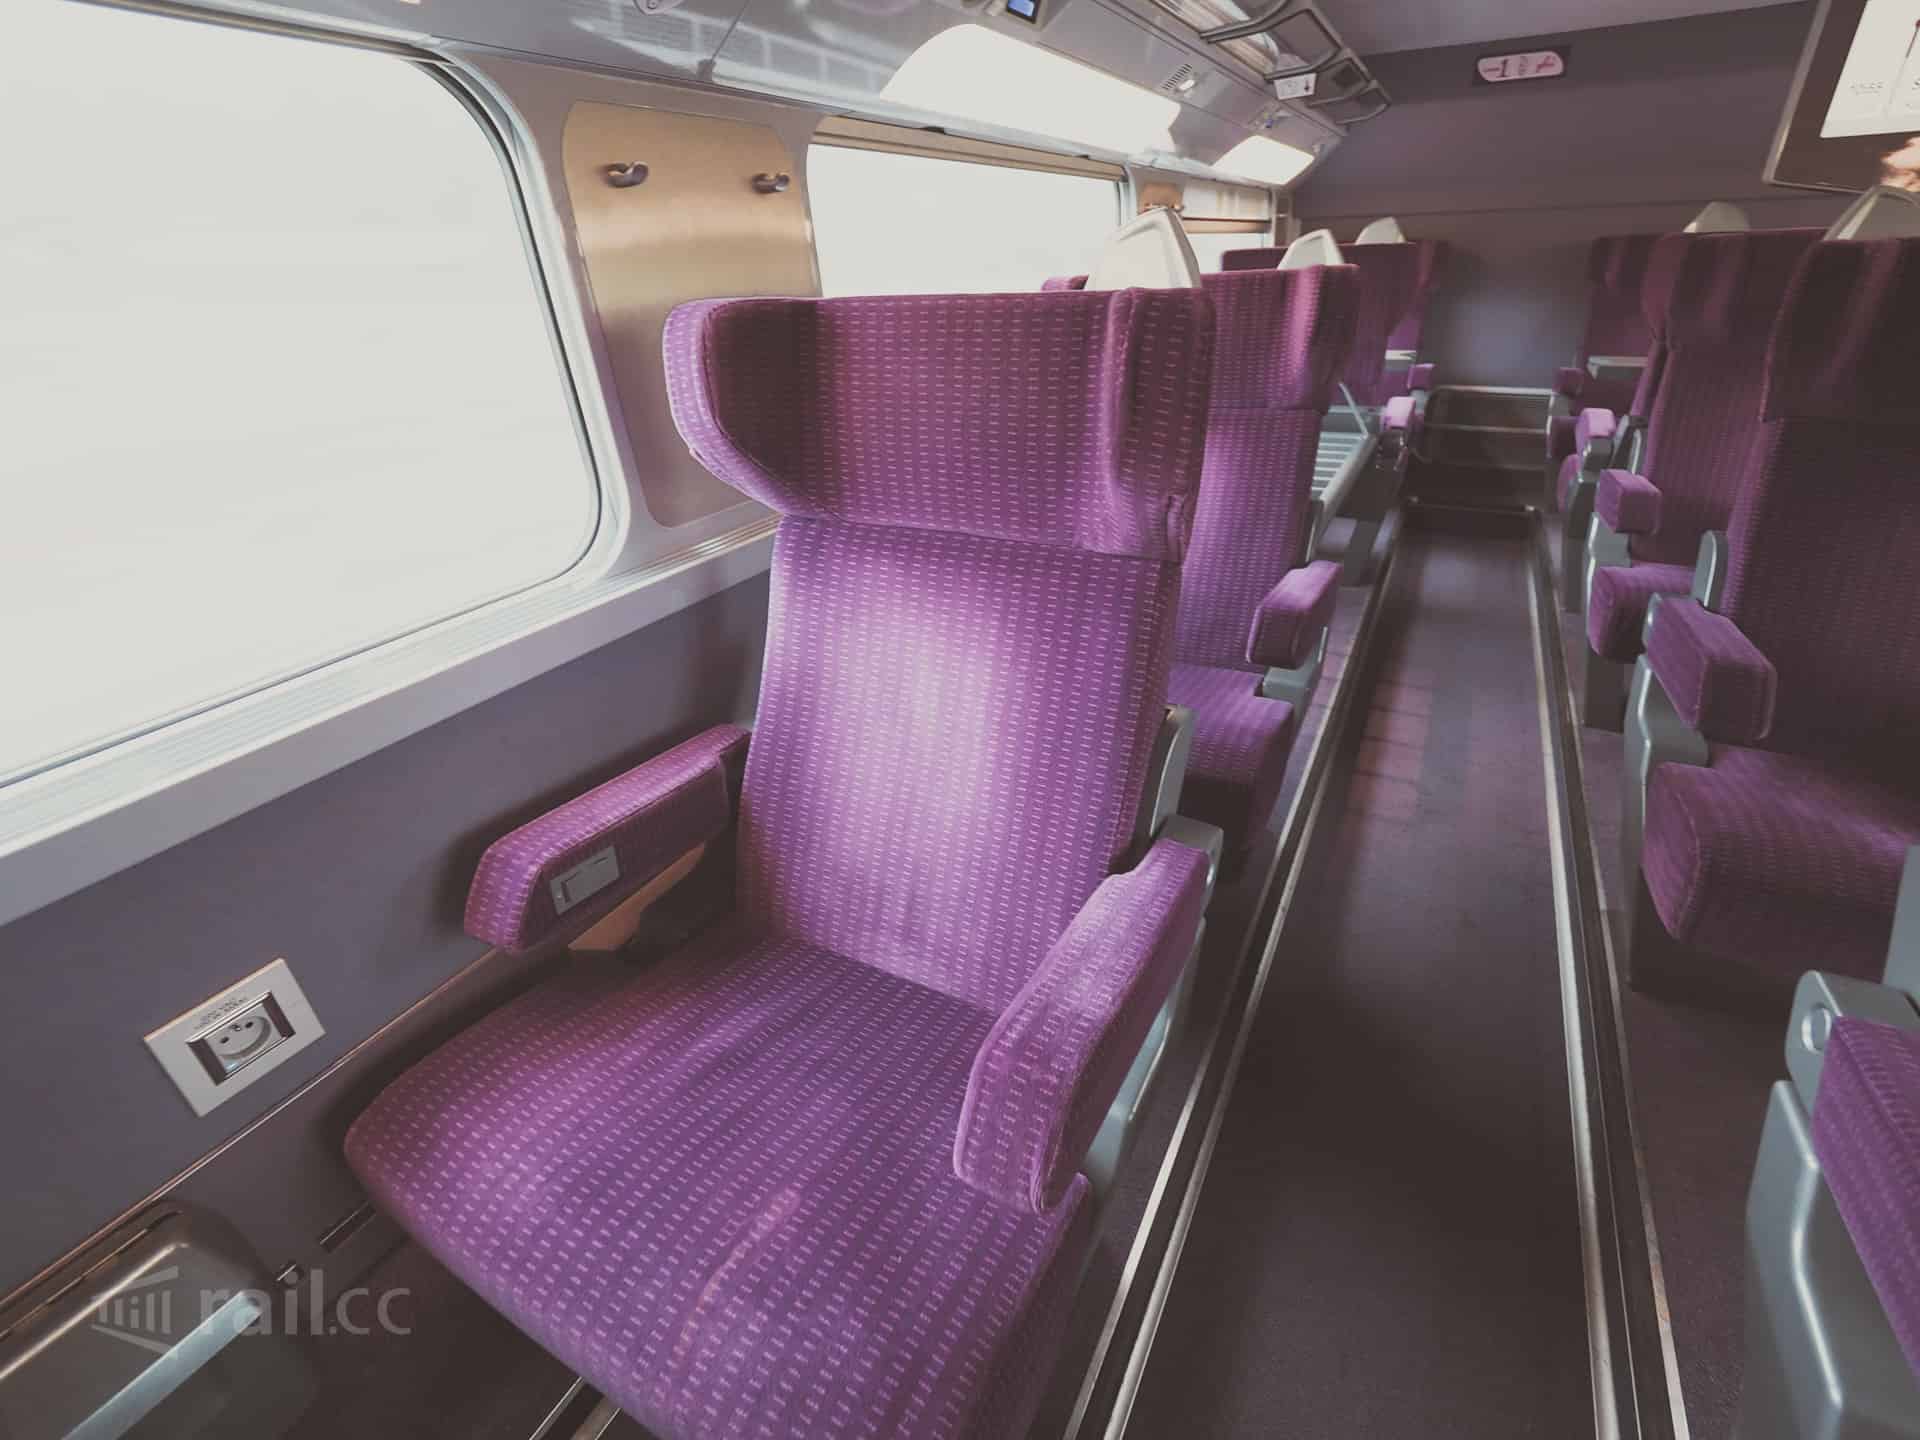 Paris to Frankfurt by TGV High-Speed-Train - Review of Tickets and Route